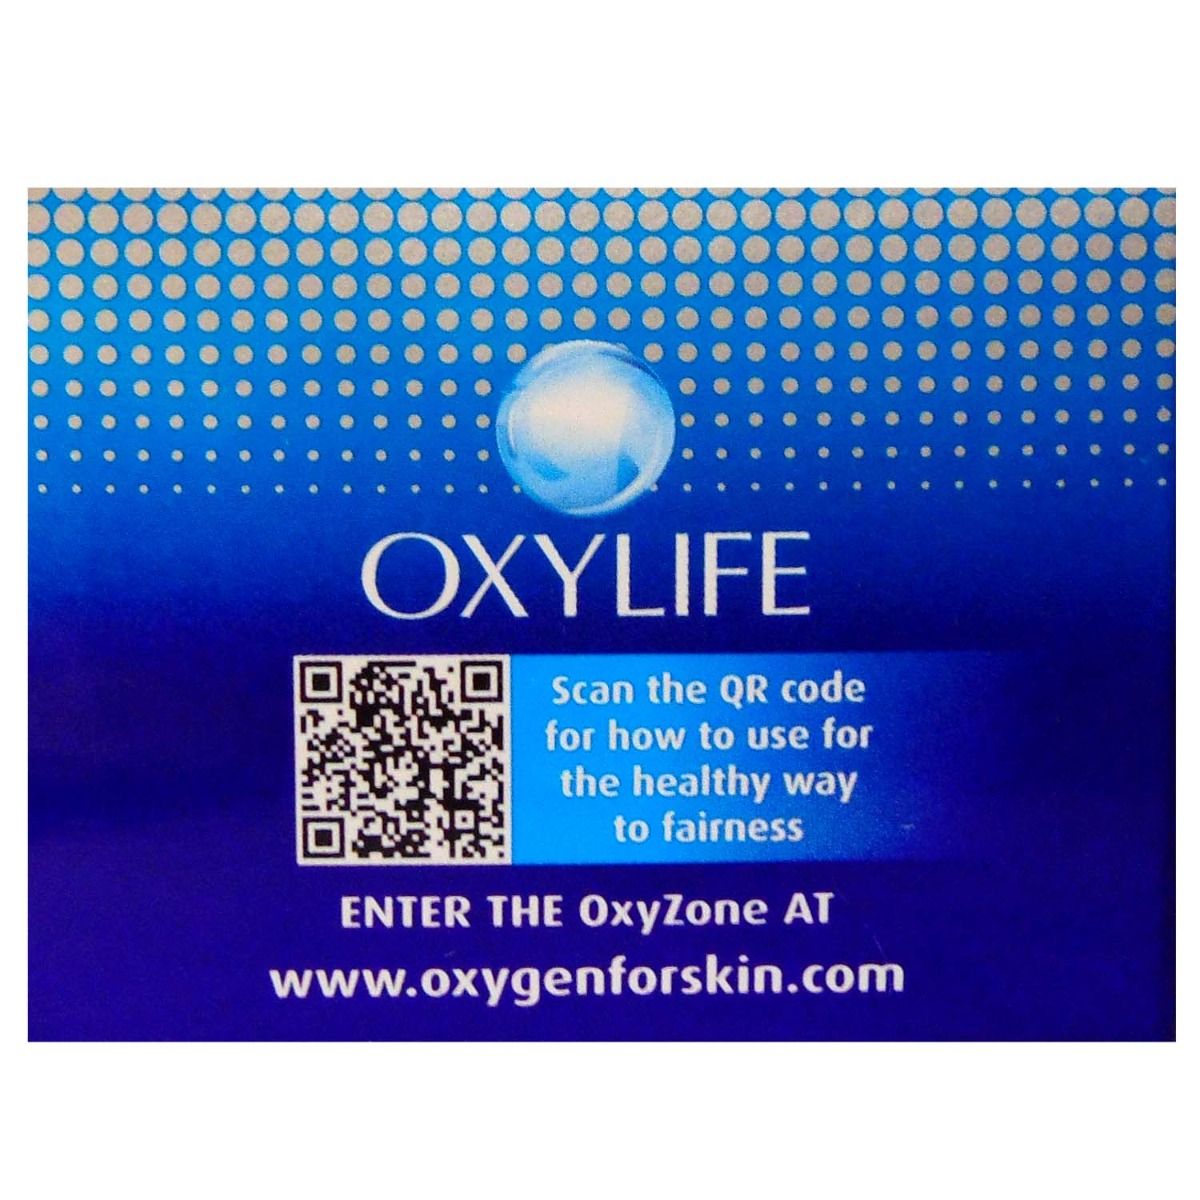 Oxylife Natural Radiance 5 Creme Bleach- With Active Oxygen, 25 gm, Pack of 1 